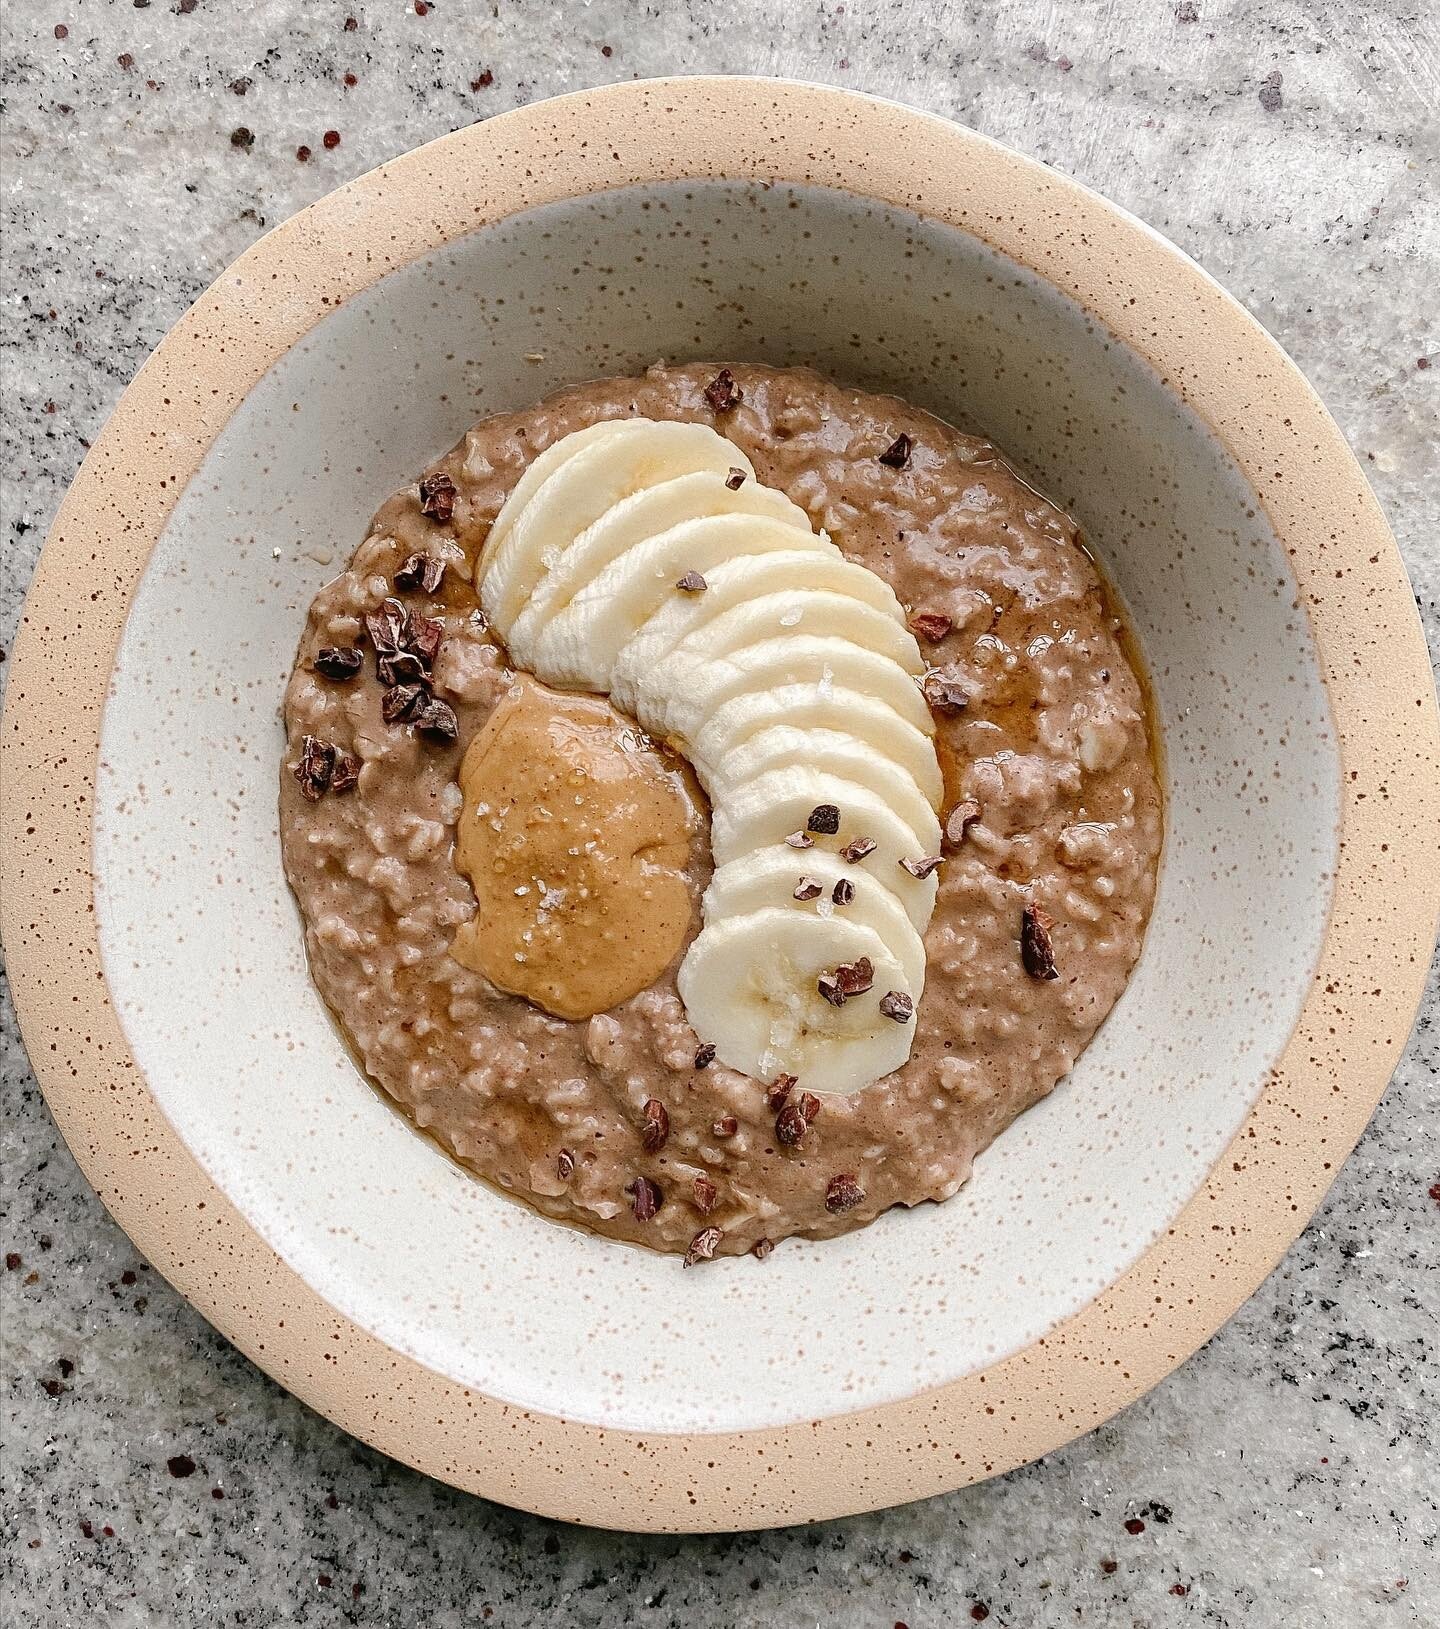 ✨salted✨ peanut butter chocolate protein oats! 🍫 I loooove a warm, filling bowl of oats in the winter and these ones include all of my favourite things 😌 I posted this cute bowl in my stories a couple weeks ago and got some requests for the recipe 